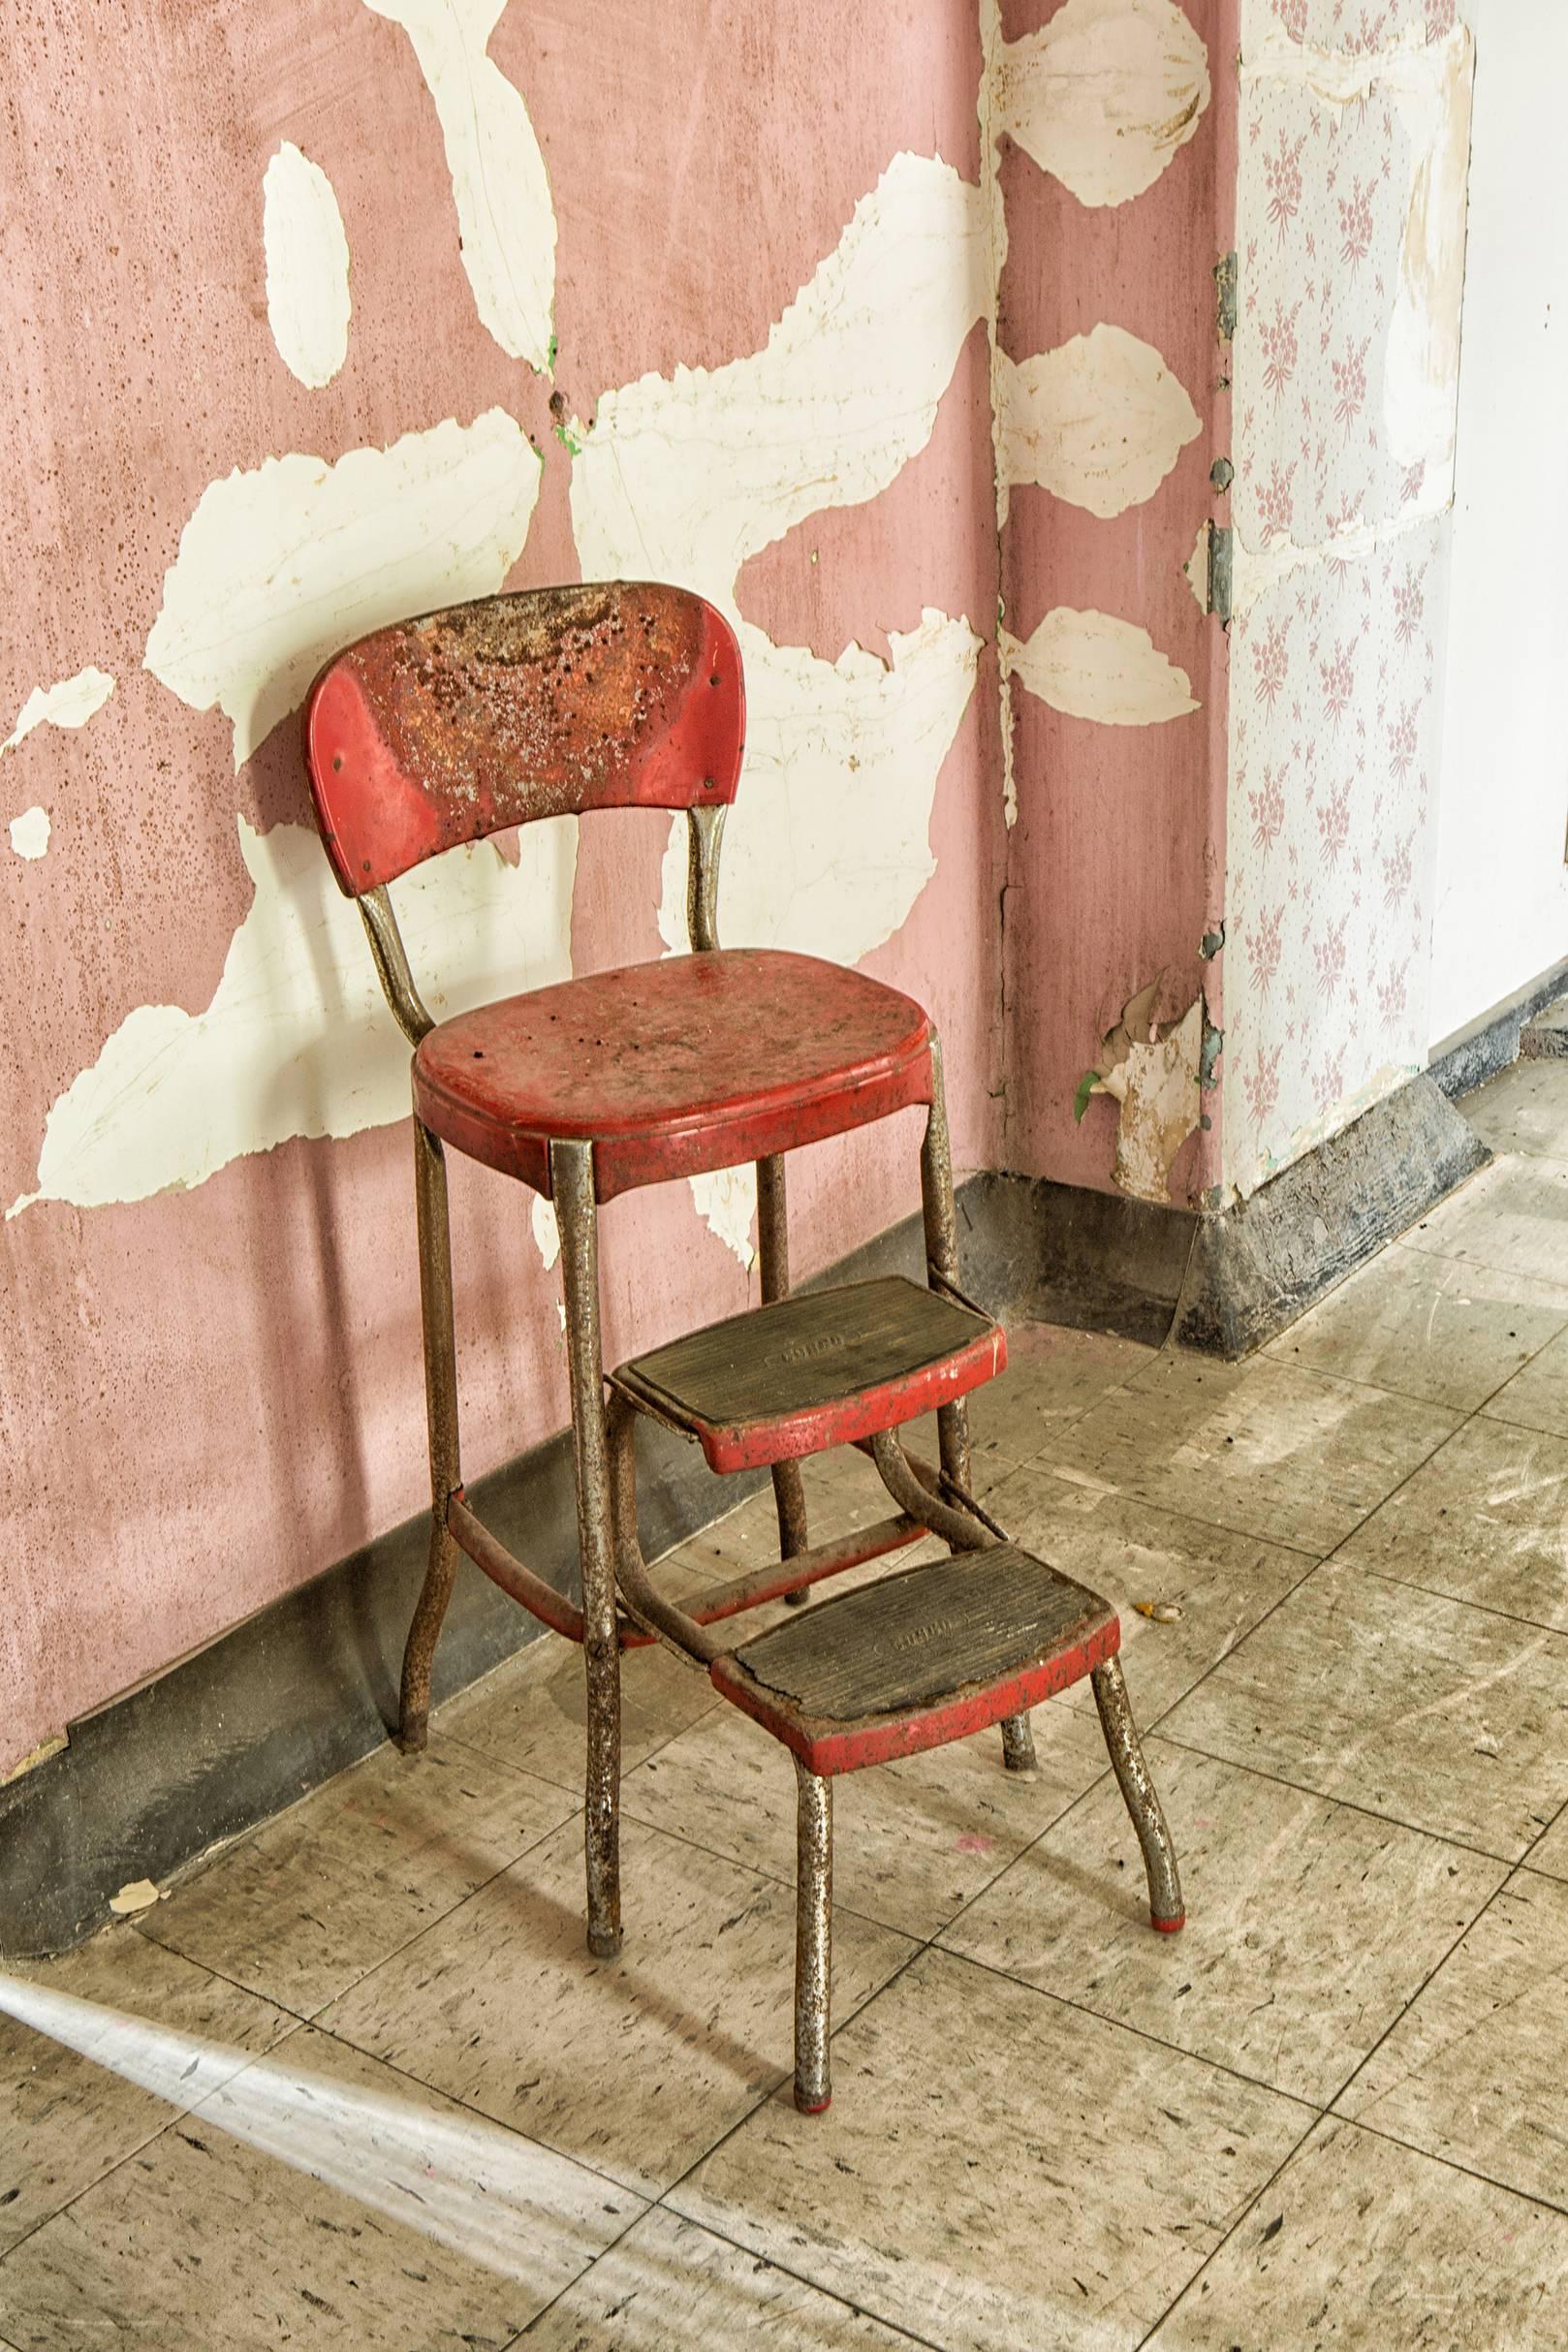 "Absent", abandoned, metal print, vintage, chair, red, pink, color photograph